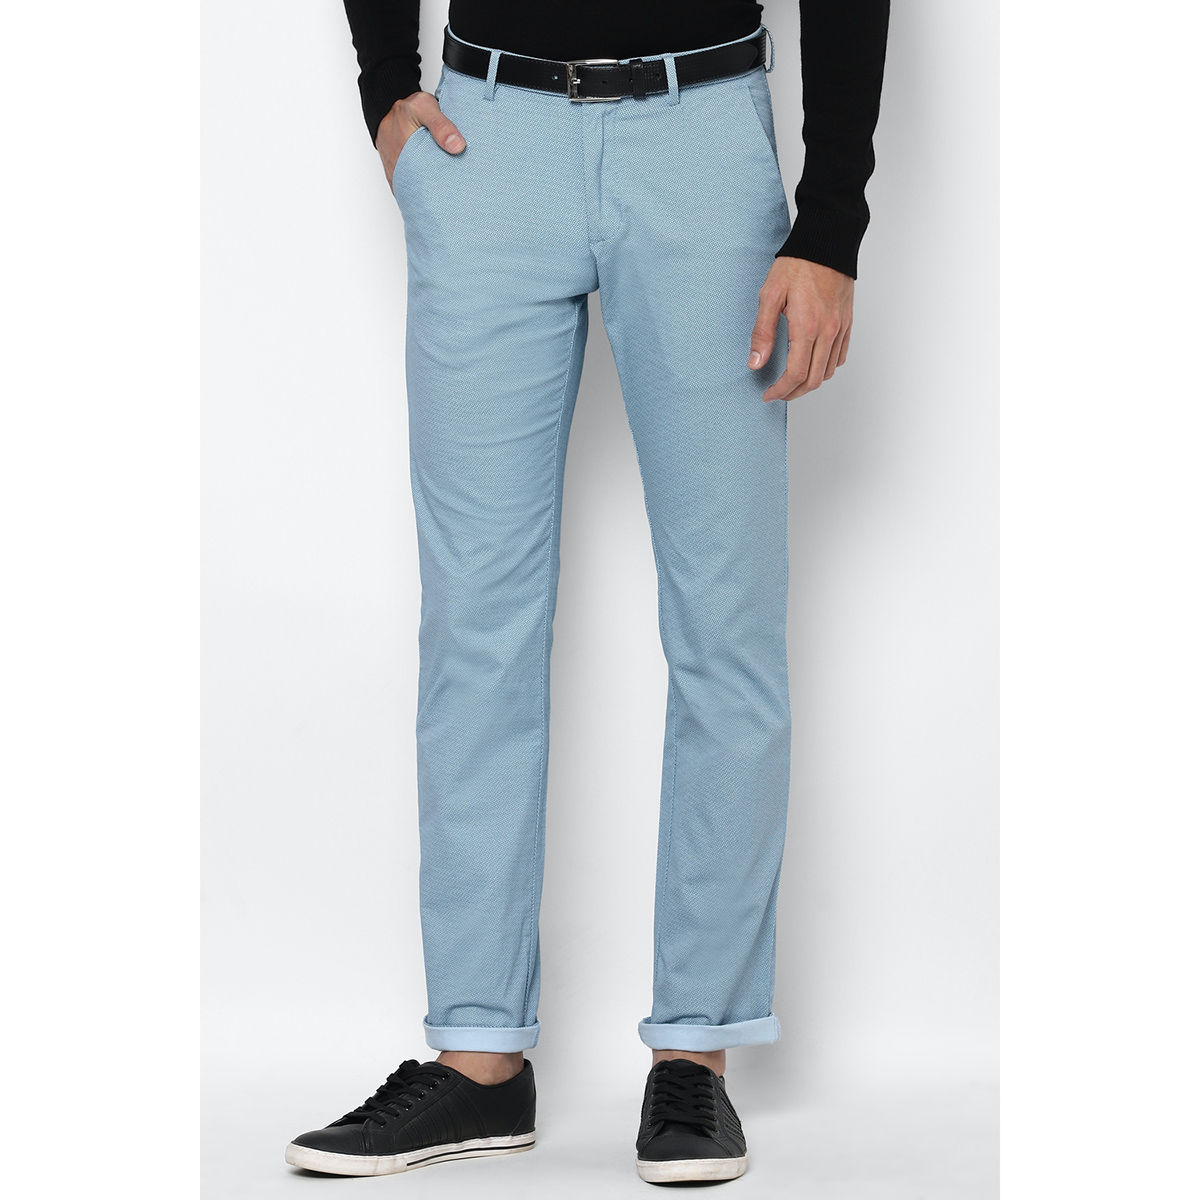 ALLEN SOLLY Men Solid Slim Straight Casual Trousers  Lifestyle Stores   Sector 4C  Ghaziabad